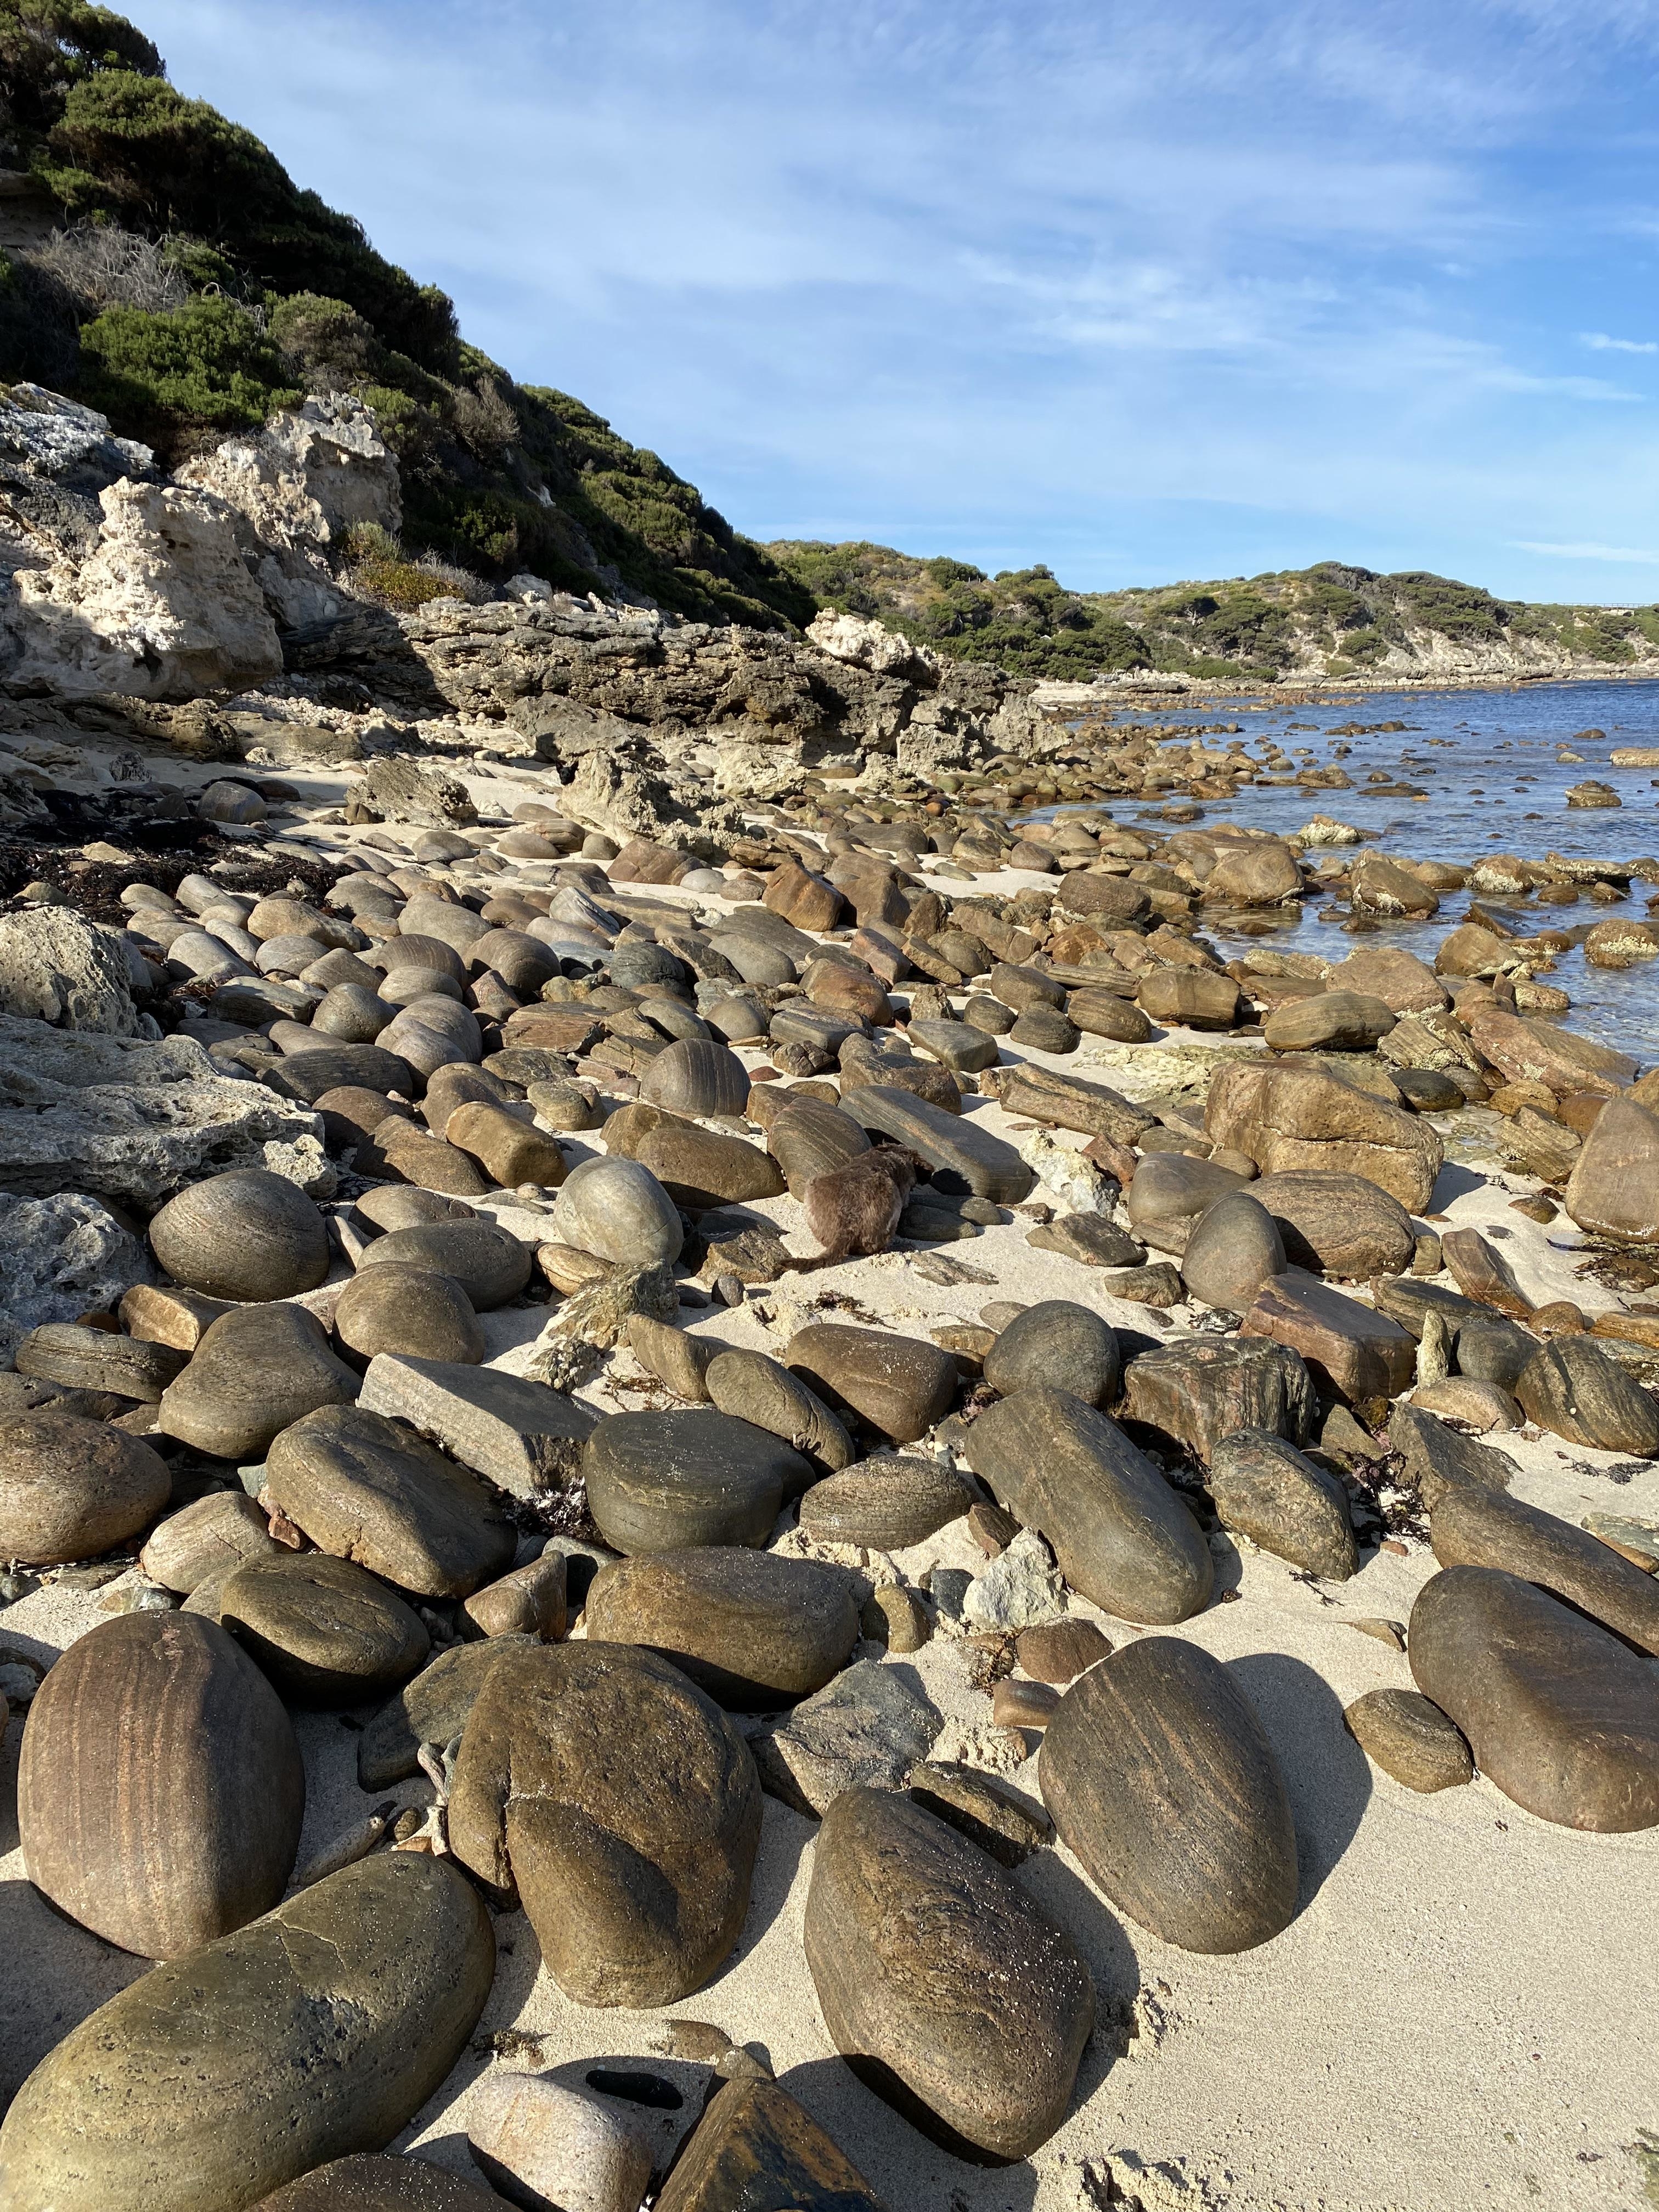 Rocky seaside landscape with smooth, large boulders scattered across a sandy beach. Rocky terrain and greenery are in the background, with a calm sea